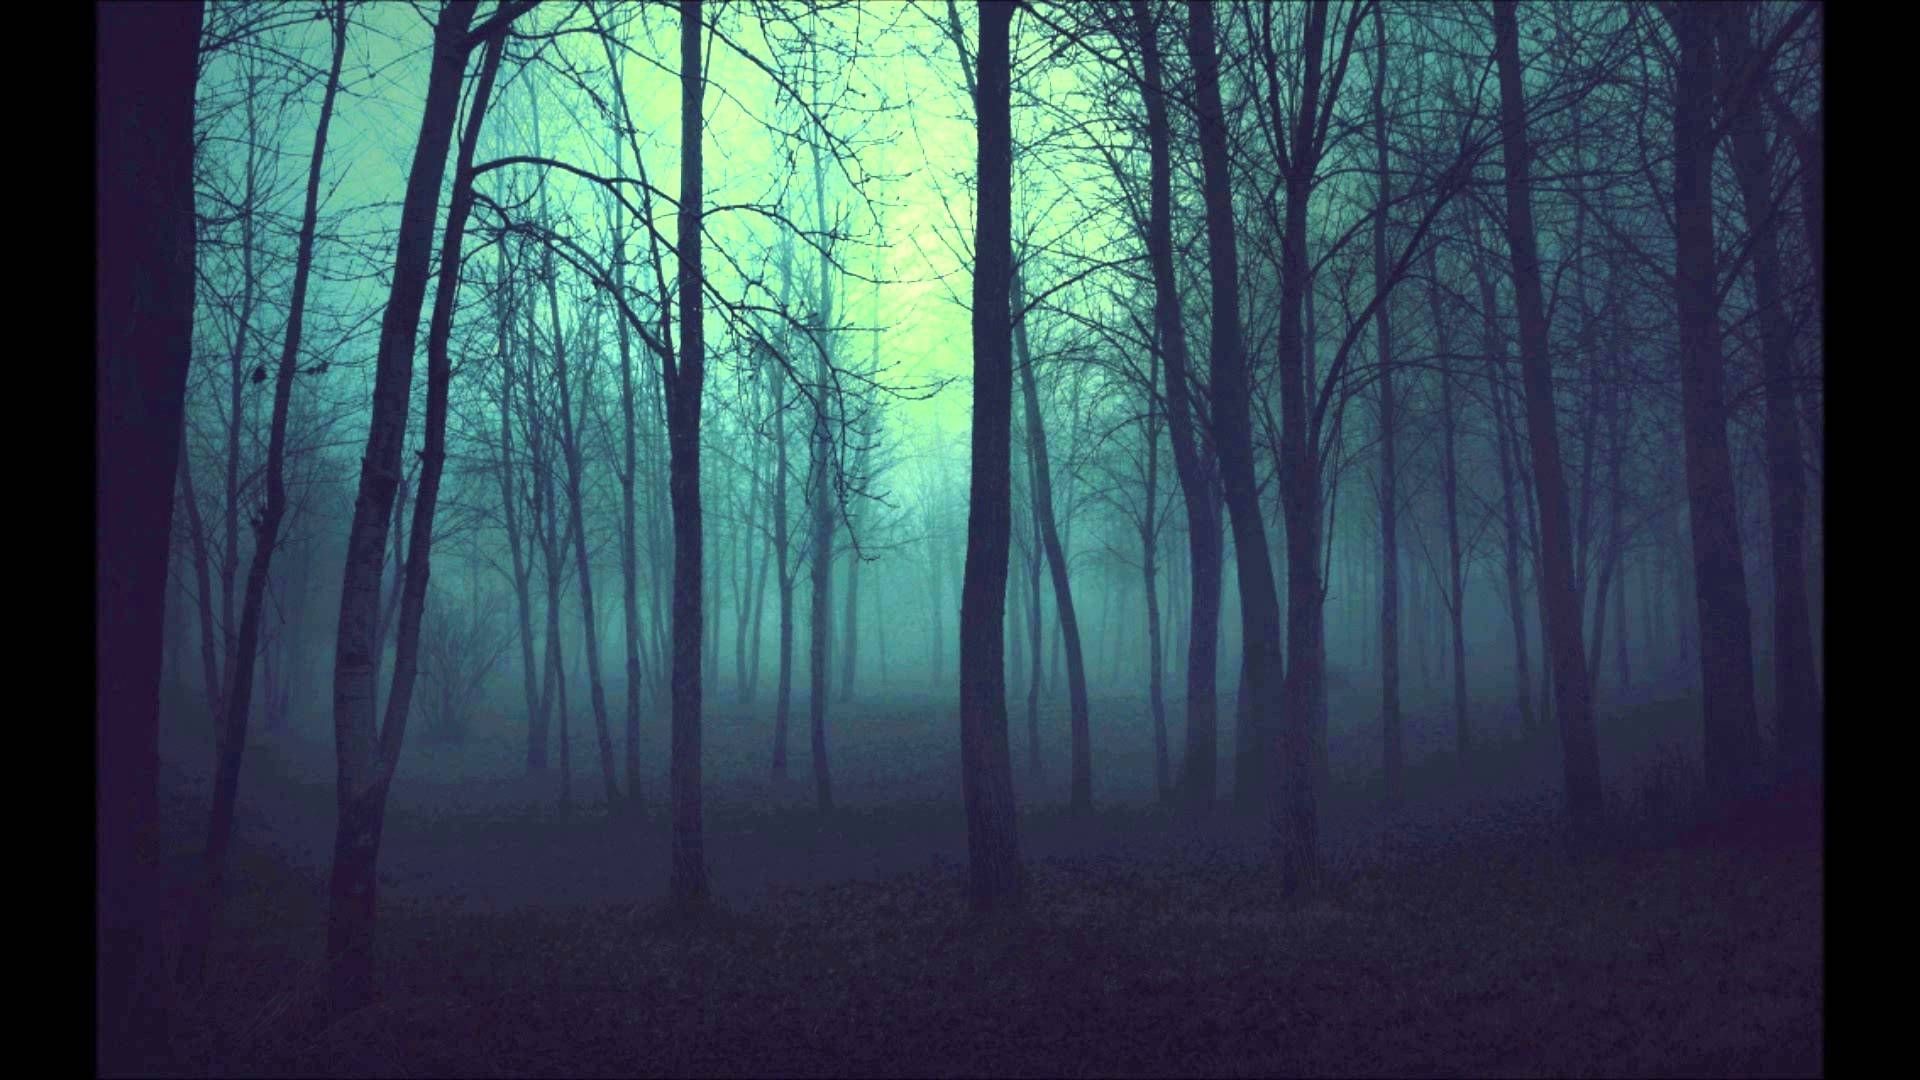 1920x1080 woods - Google Search